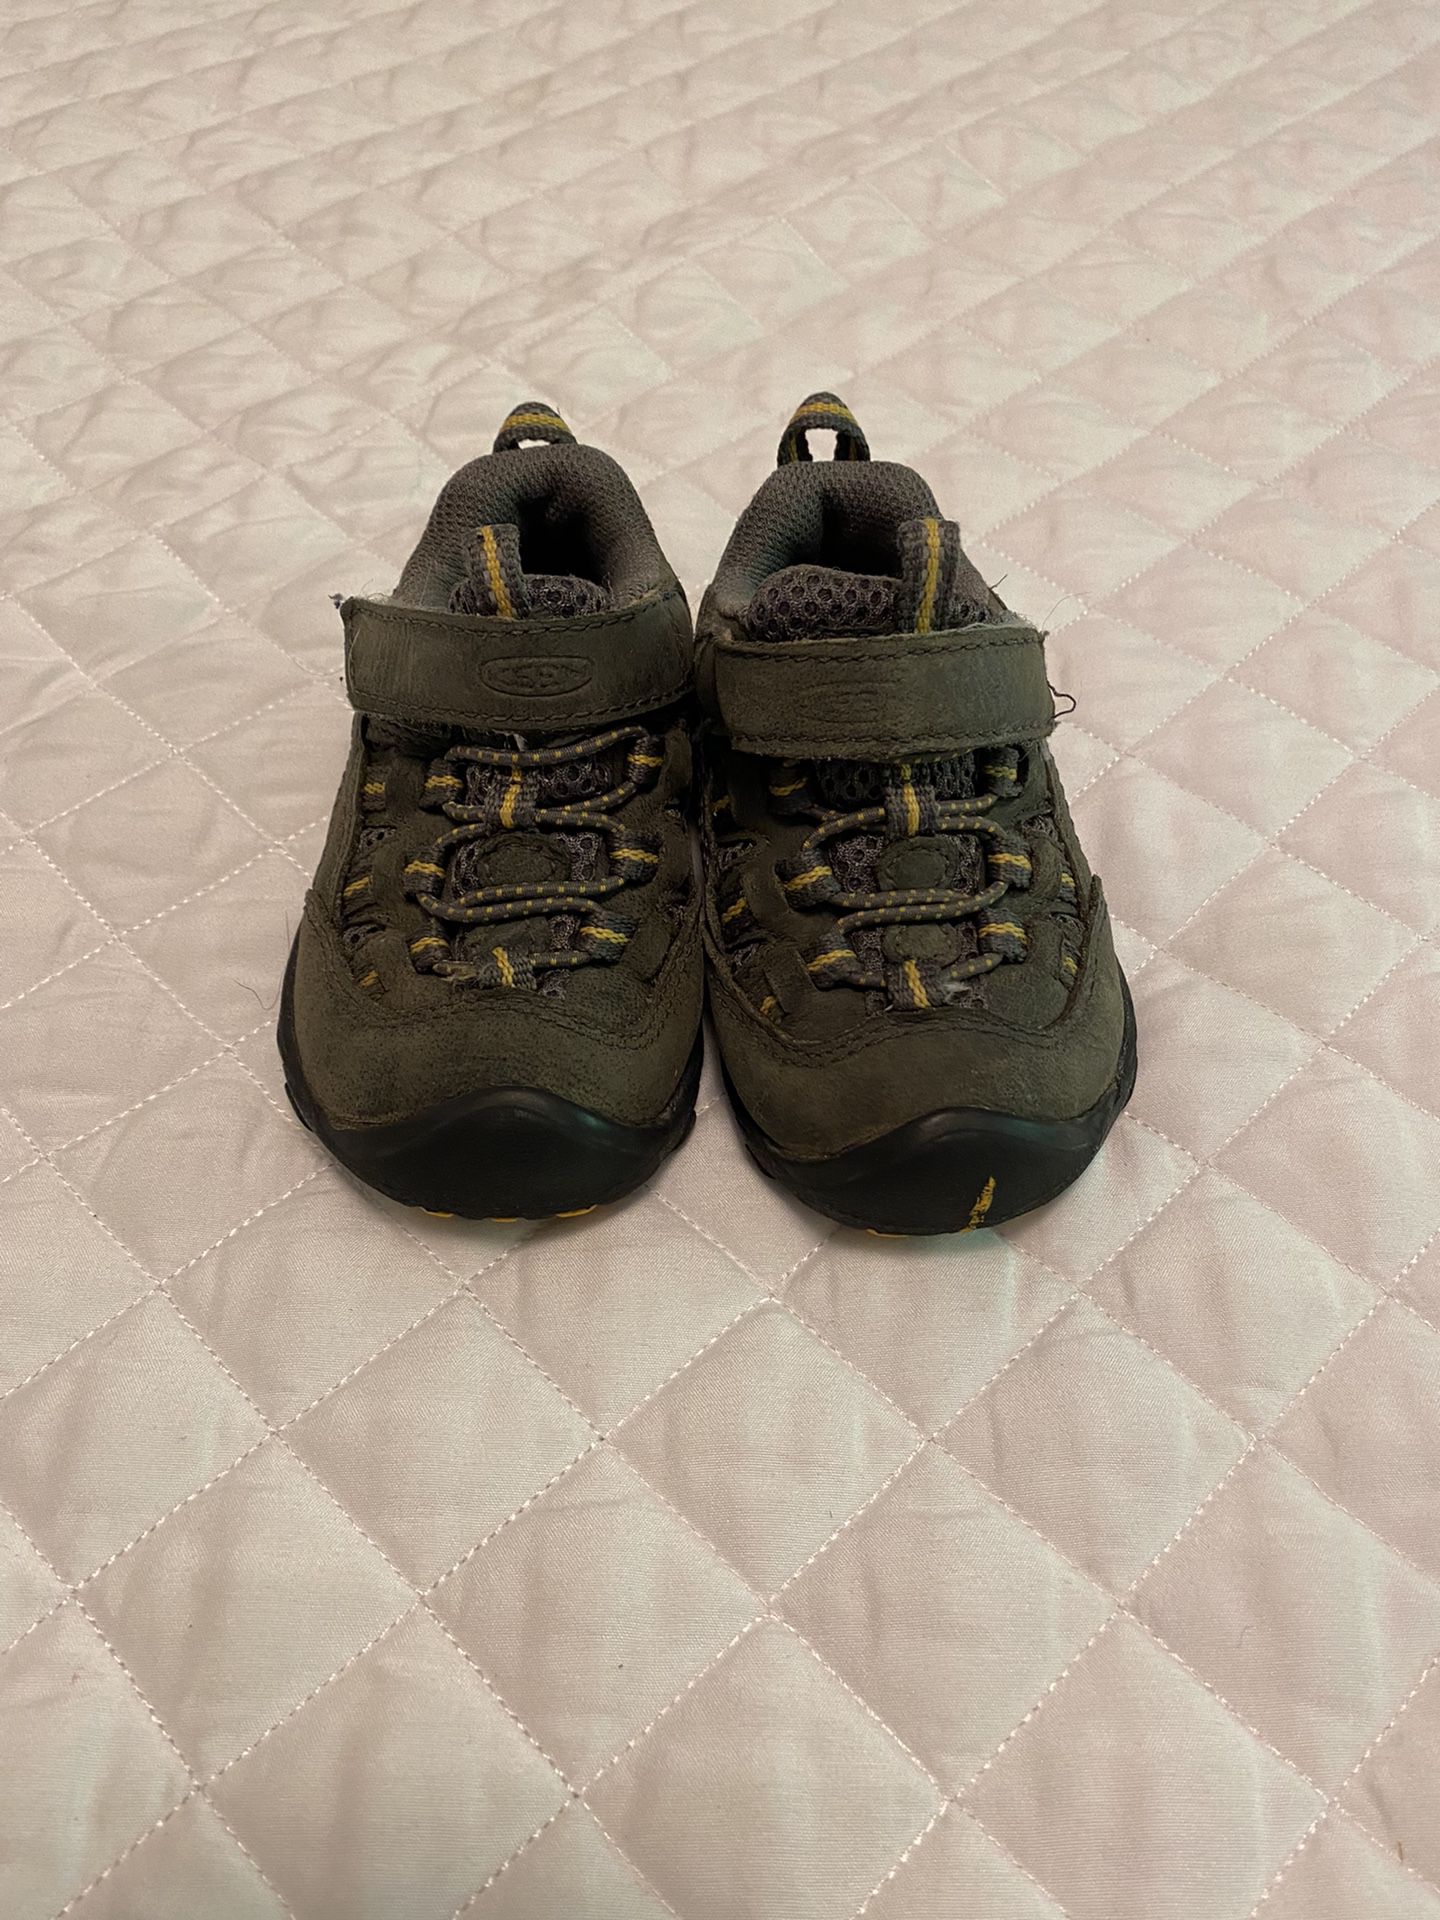 Toddler Size 5 Keens